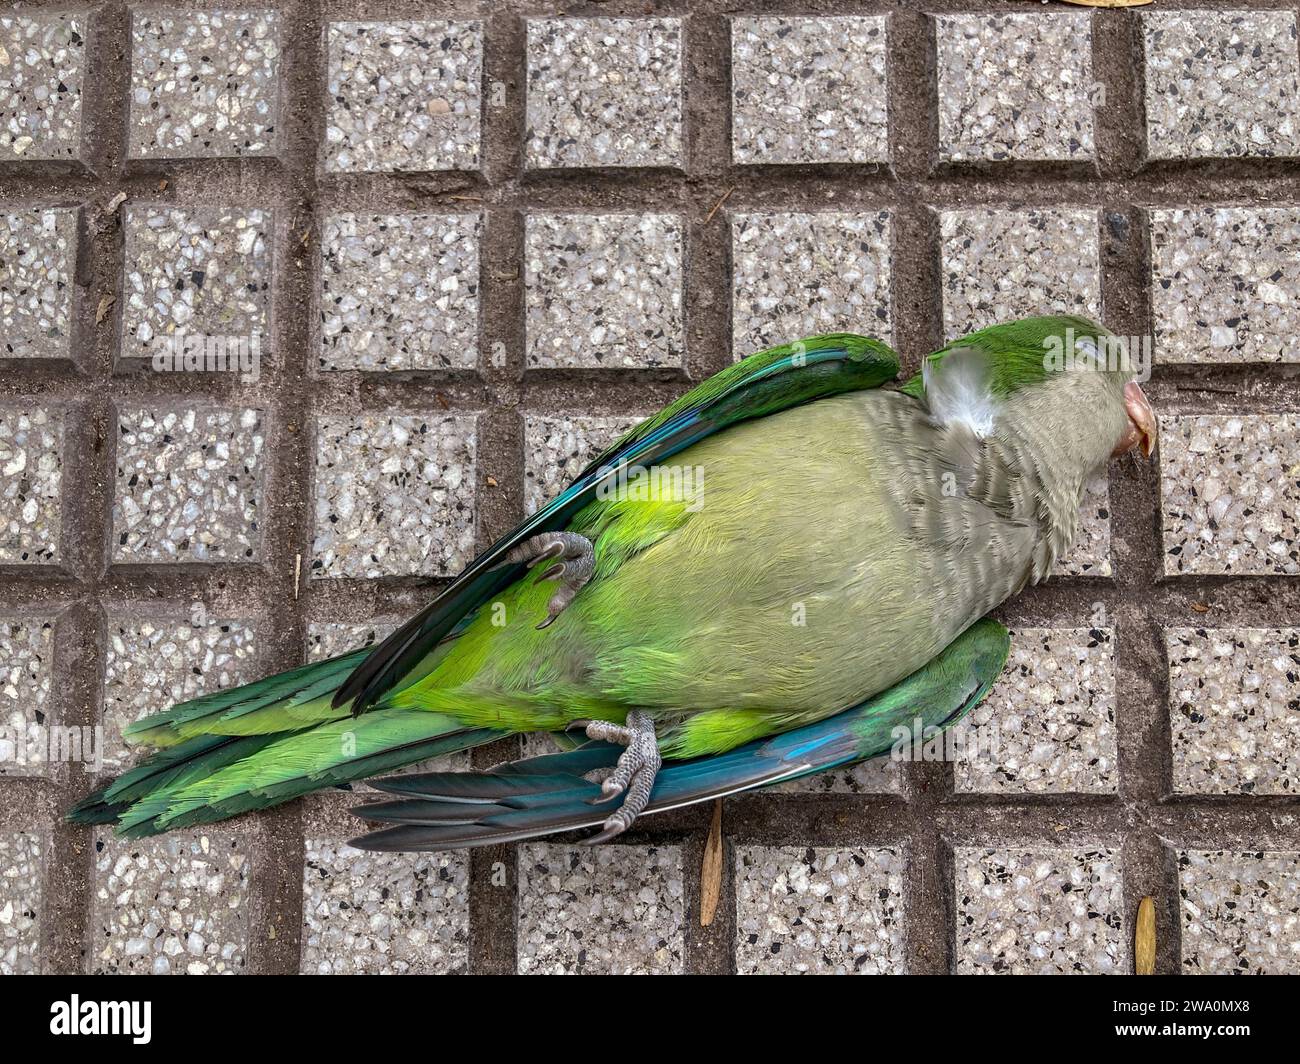 Dead monk parakeet (Myiopsitta monachus) on a pavement in the city, Buenos Aires, Argentina, South America Stock Photo